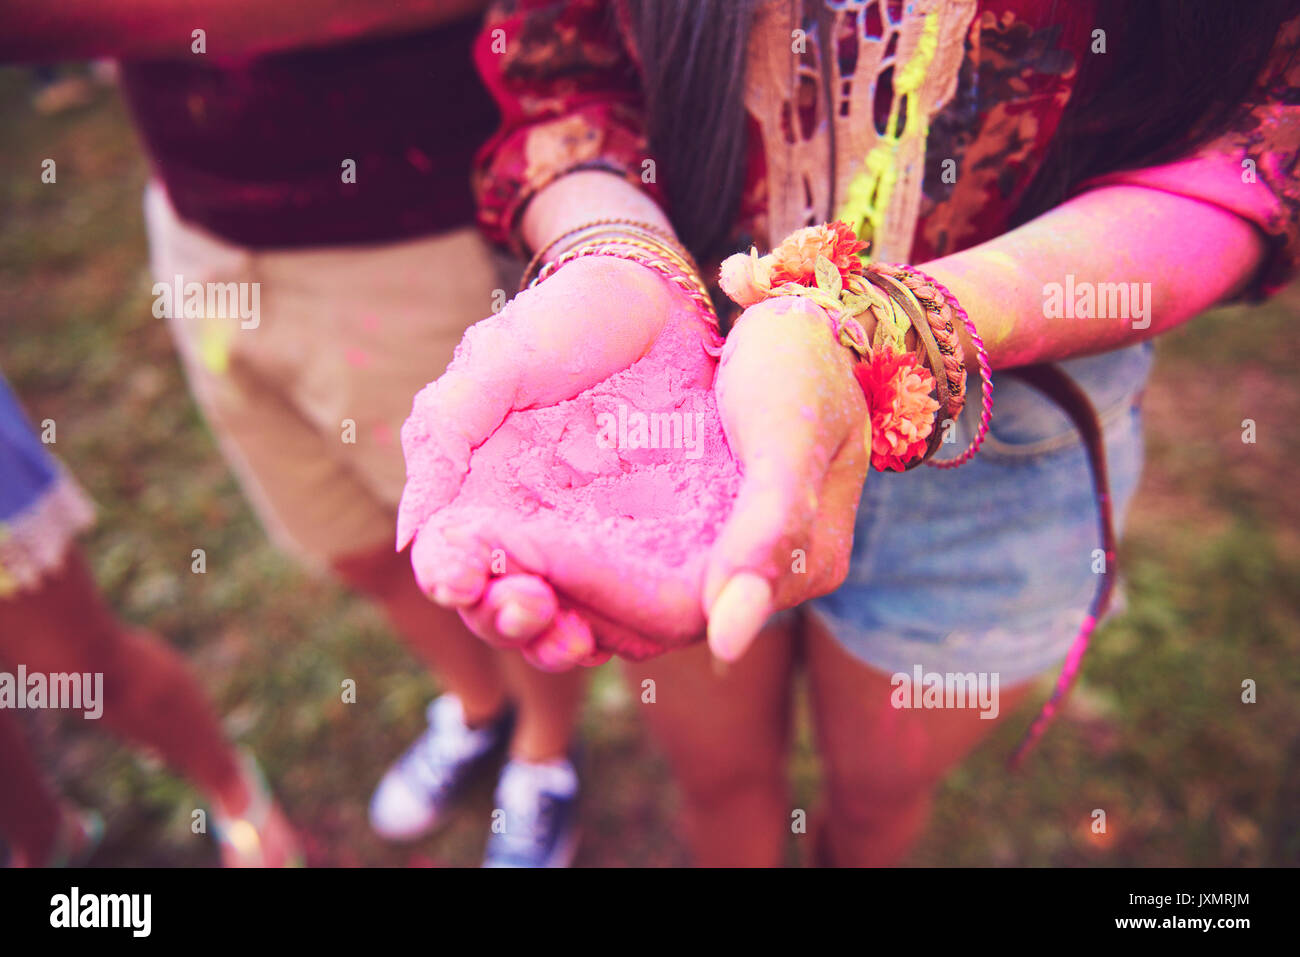 Pink chalk cupped in young woman's hands at festival Stock Photo